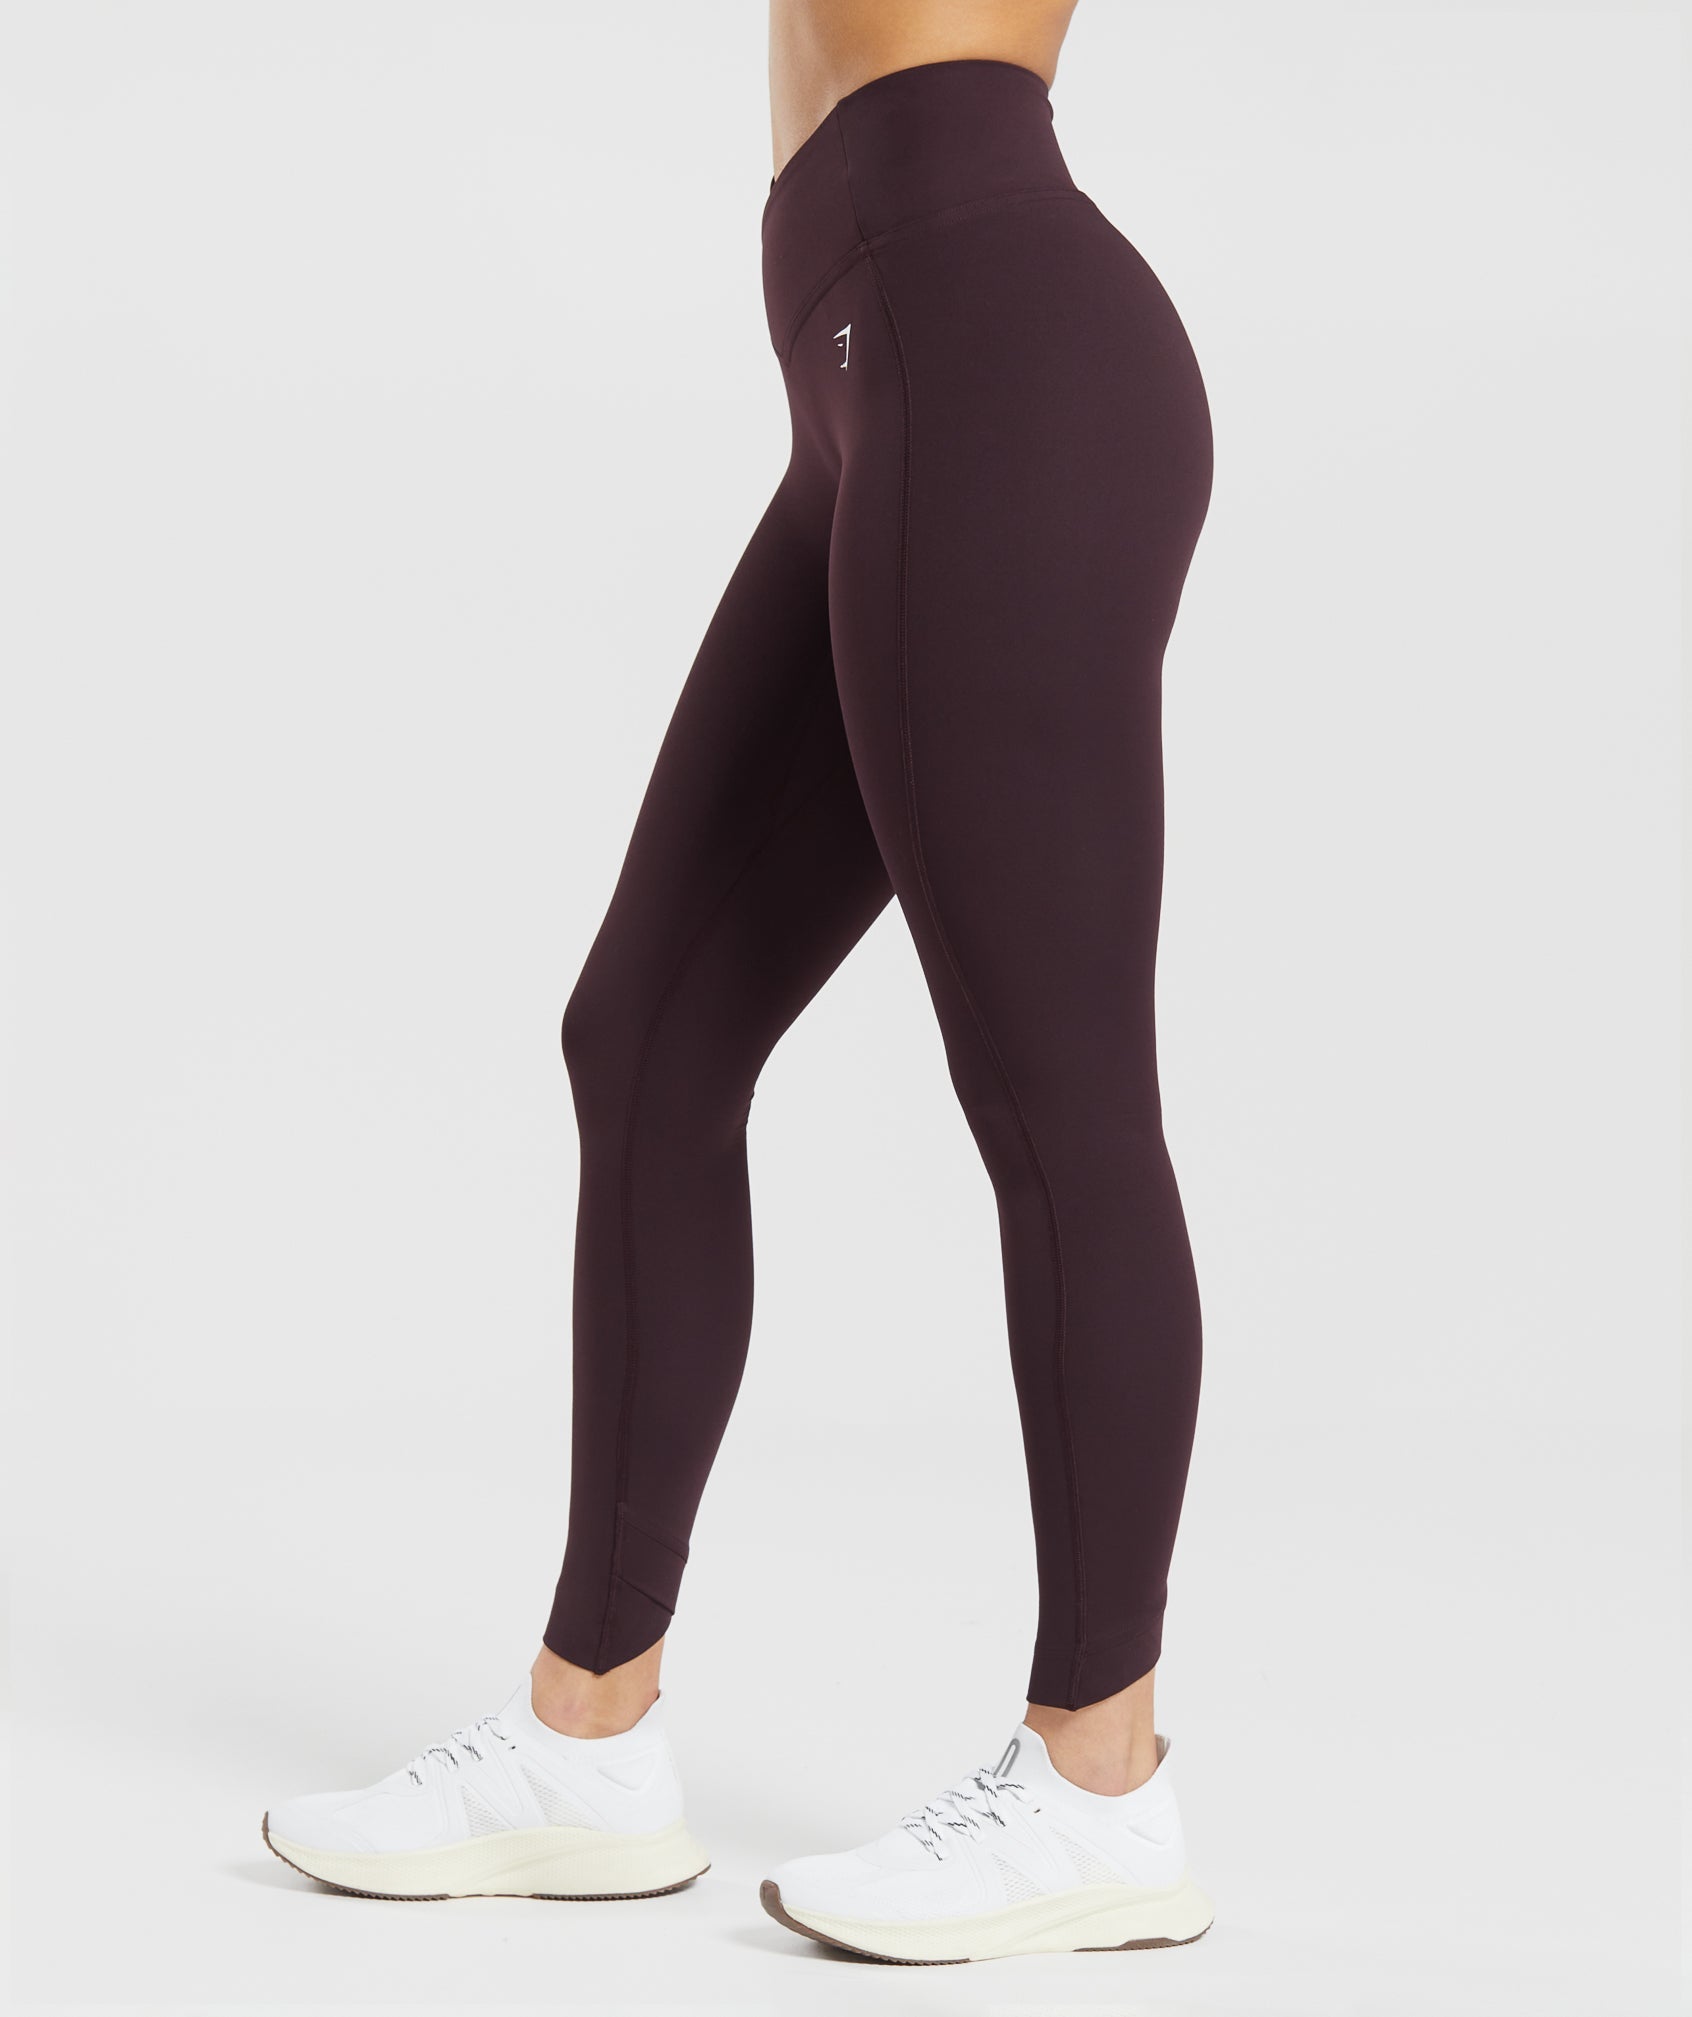 What Are The Most Popular Gymshark Leggings